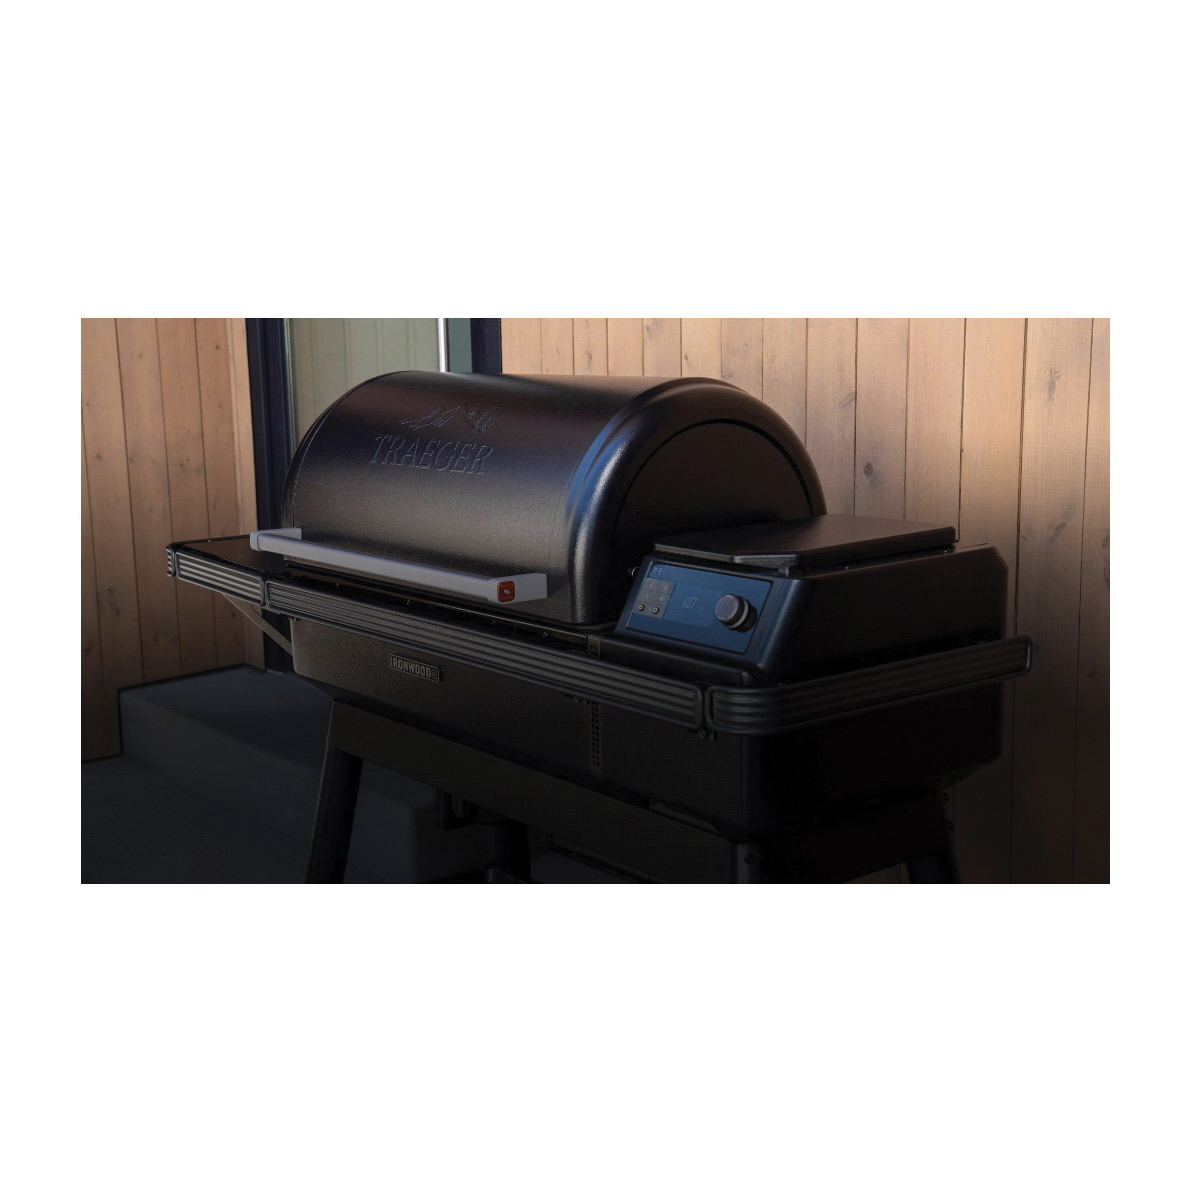 Traeger Ironwood TFB61RLG Pellet Grill, 396 sq-in Primary Cooking Surface, 220 sq-in Secondary Cooking Surface, Black - 3